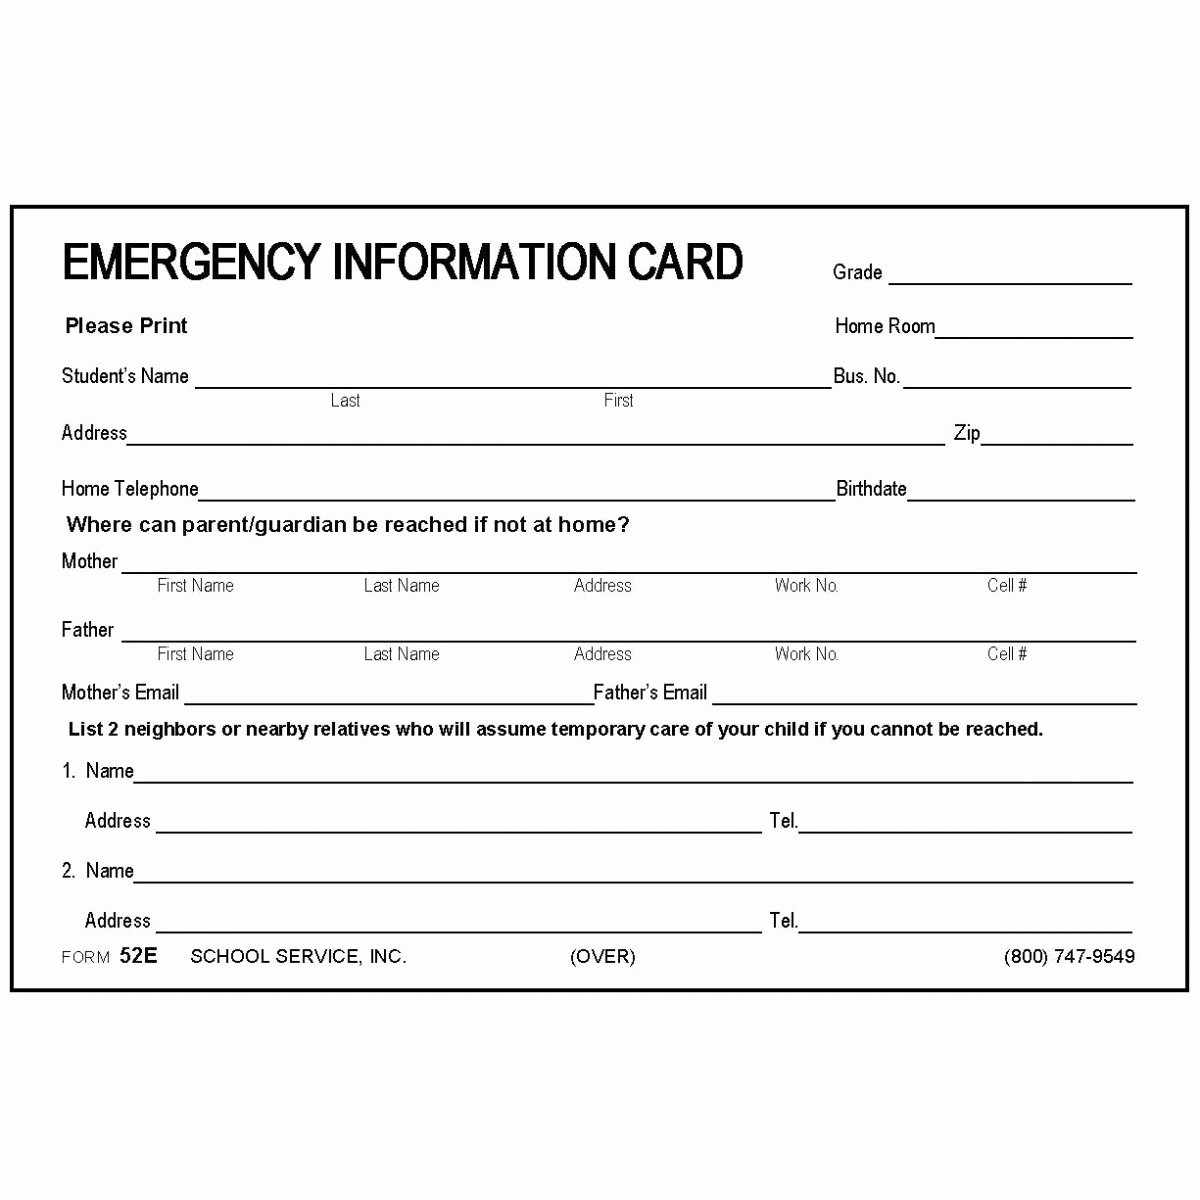 Emergency Contact Card Template Luxury Employee Emergency Contact Template 5 Employee Emergency